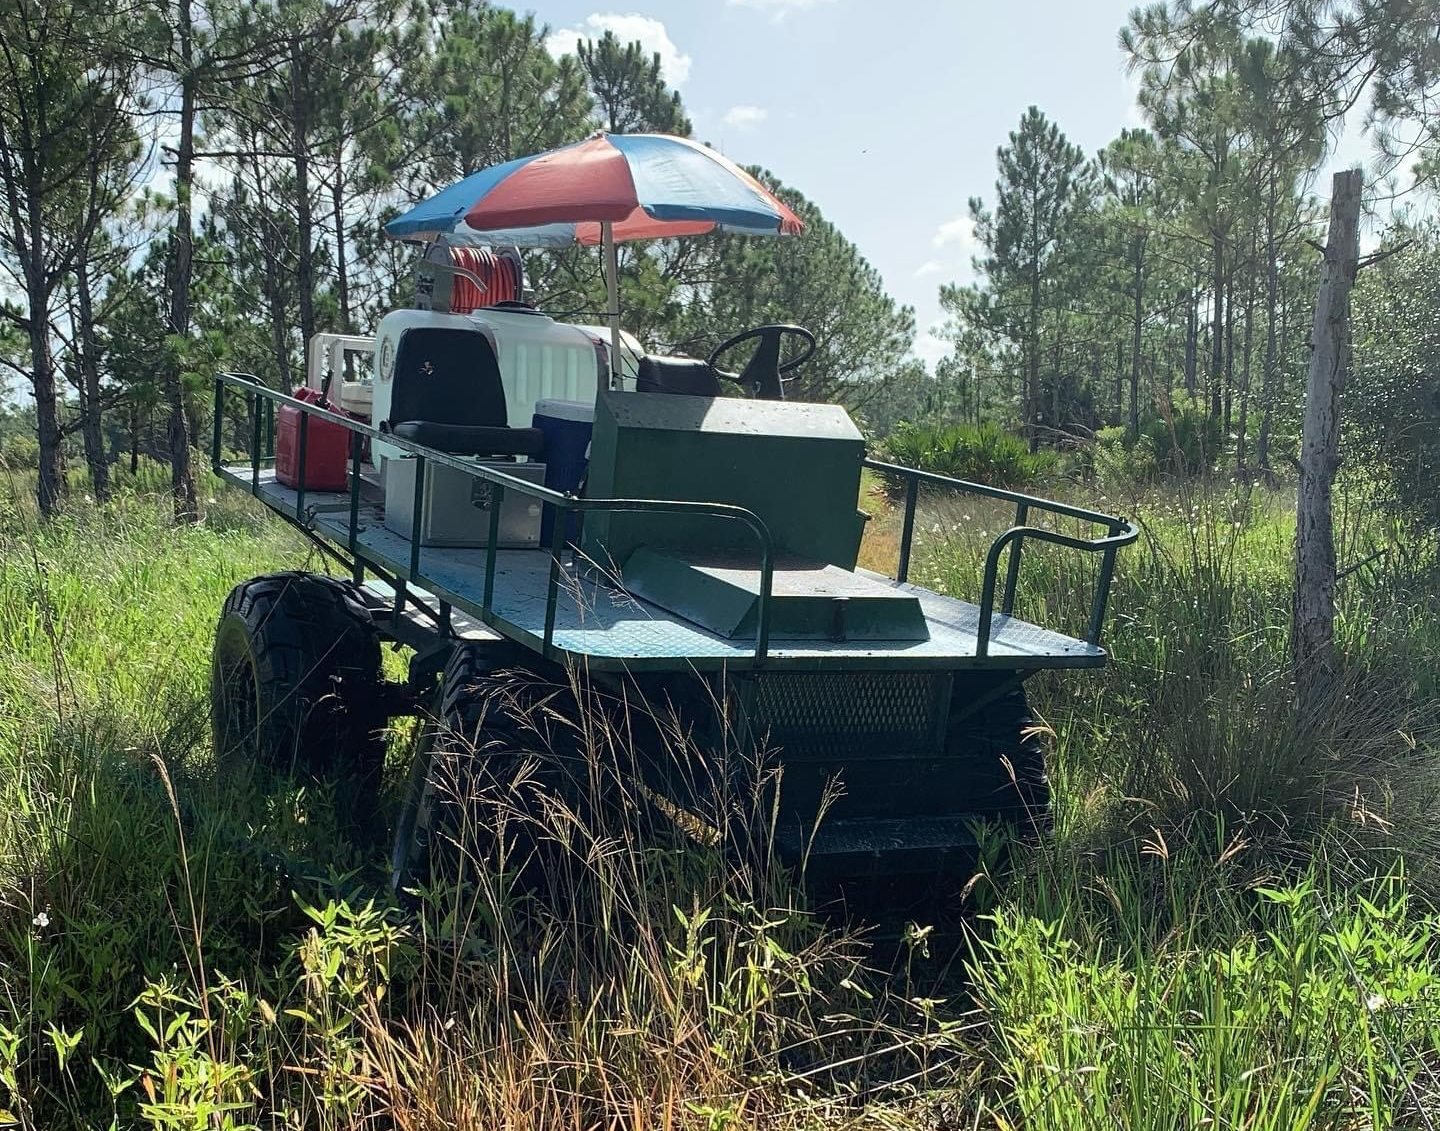 A swamp buggy.